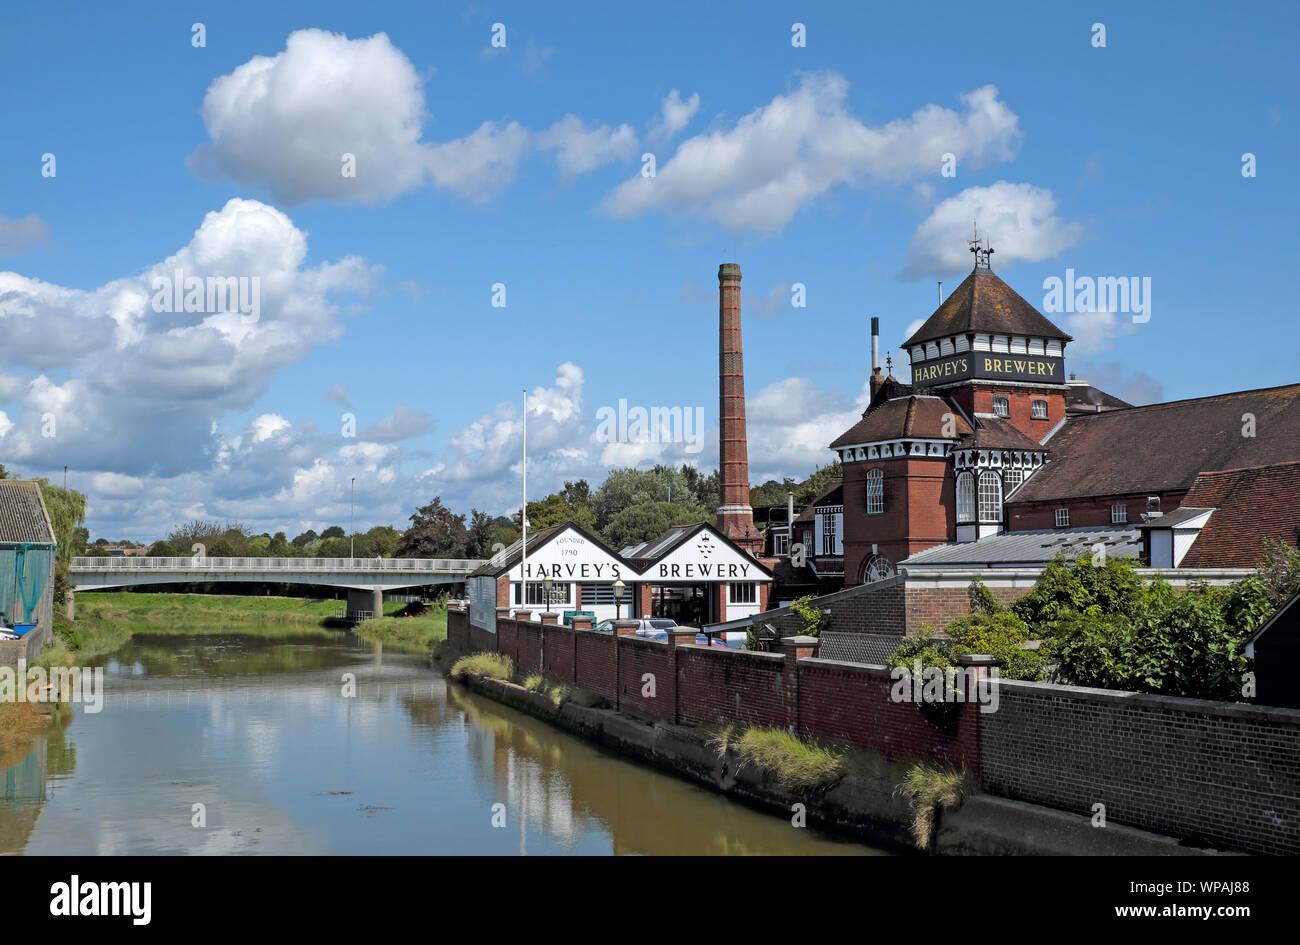 Landscape view of Harveys Brewery buildings on the River Ouse in the town of Lewes East Sussex England UK  KATHY DEWITT Stock Photo